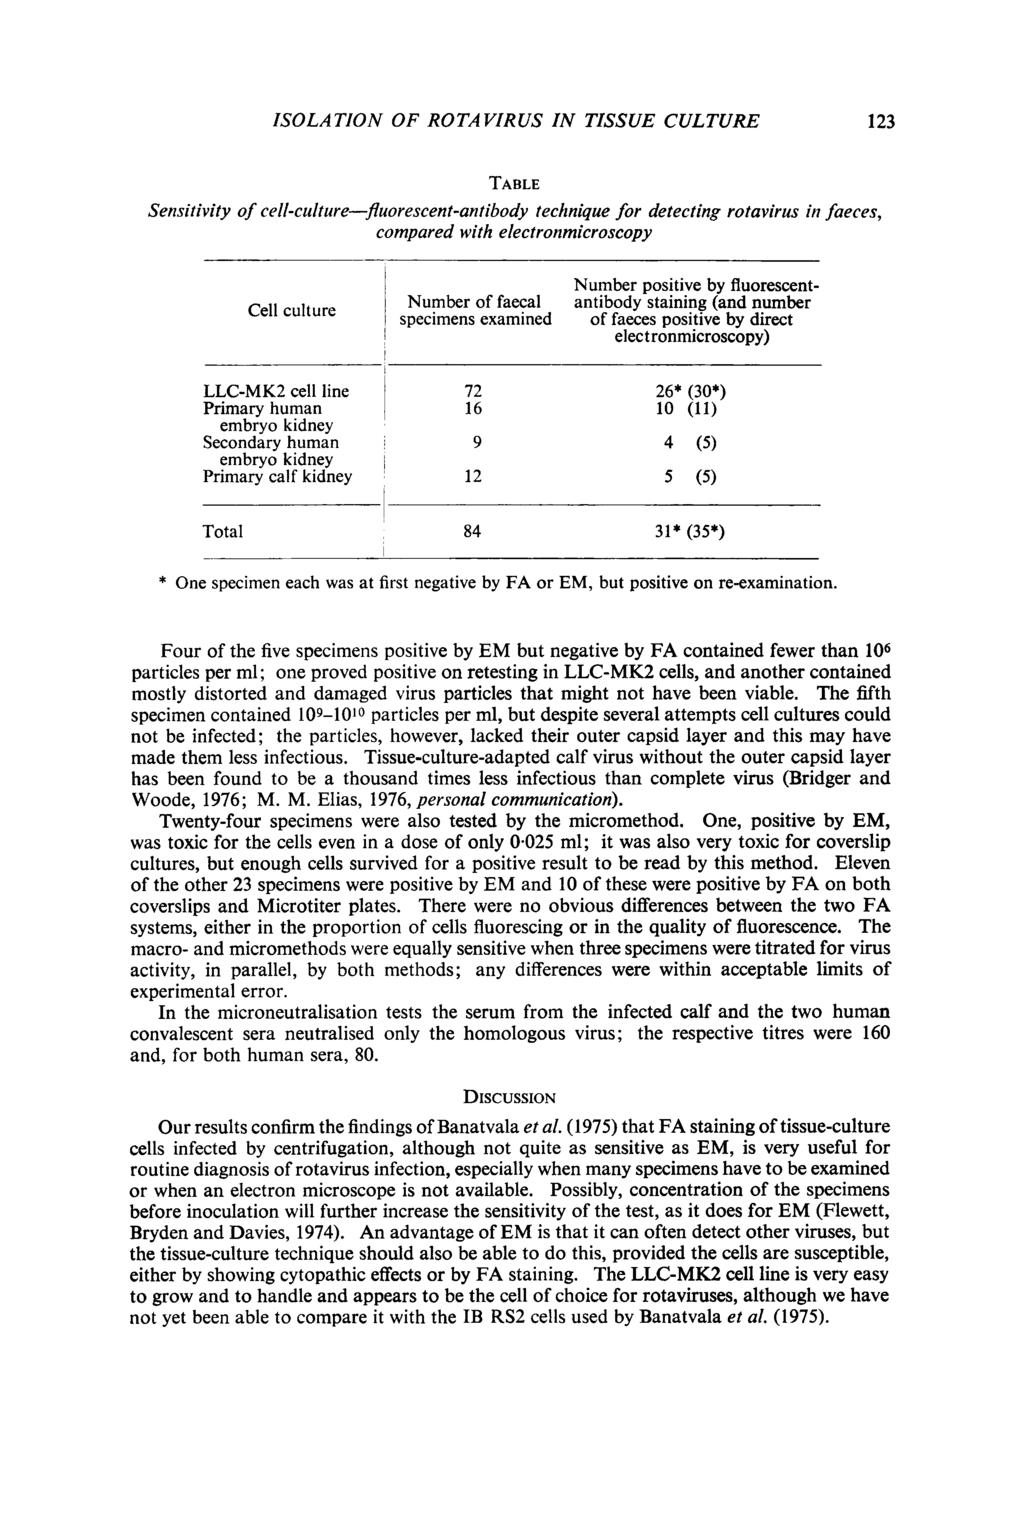 SOLATON OF ROTAVRUS N TSSUE CULTURE 123 TABLE Sensitivity of cell-culture-fluorescent-antibody technique for detecting rotavirus in faeces, compared with electronmicroscopy Cell culture Number of